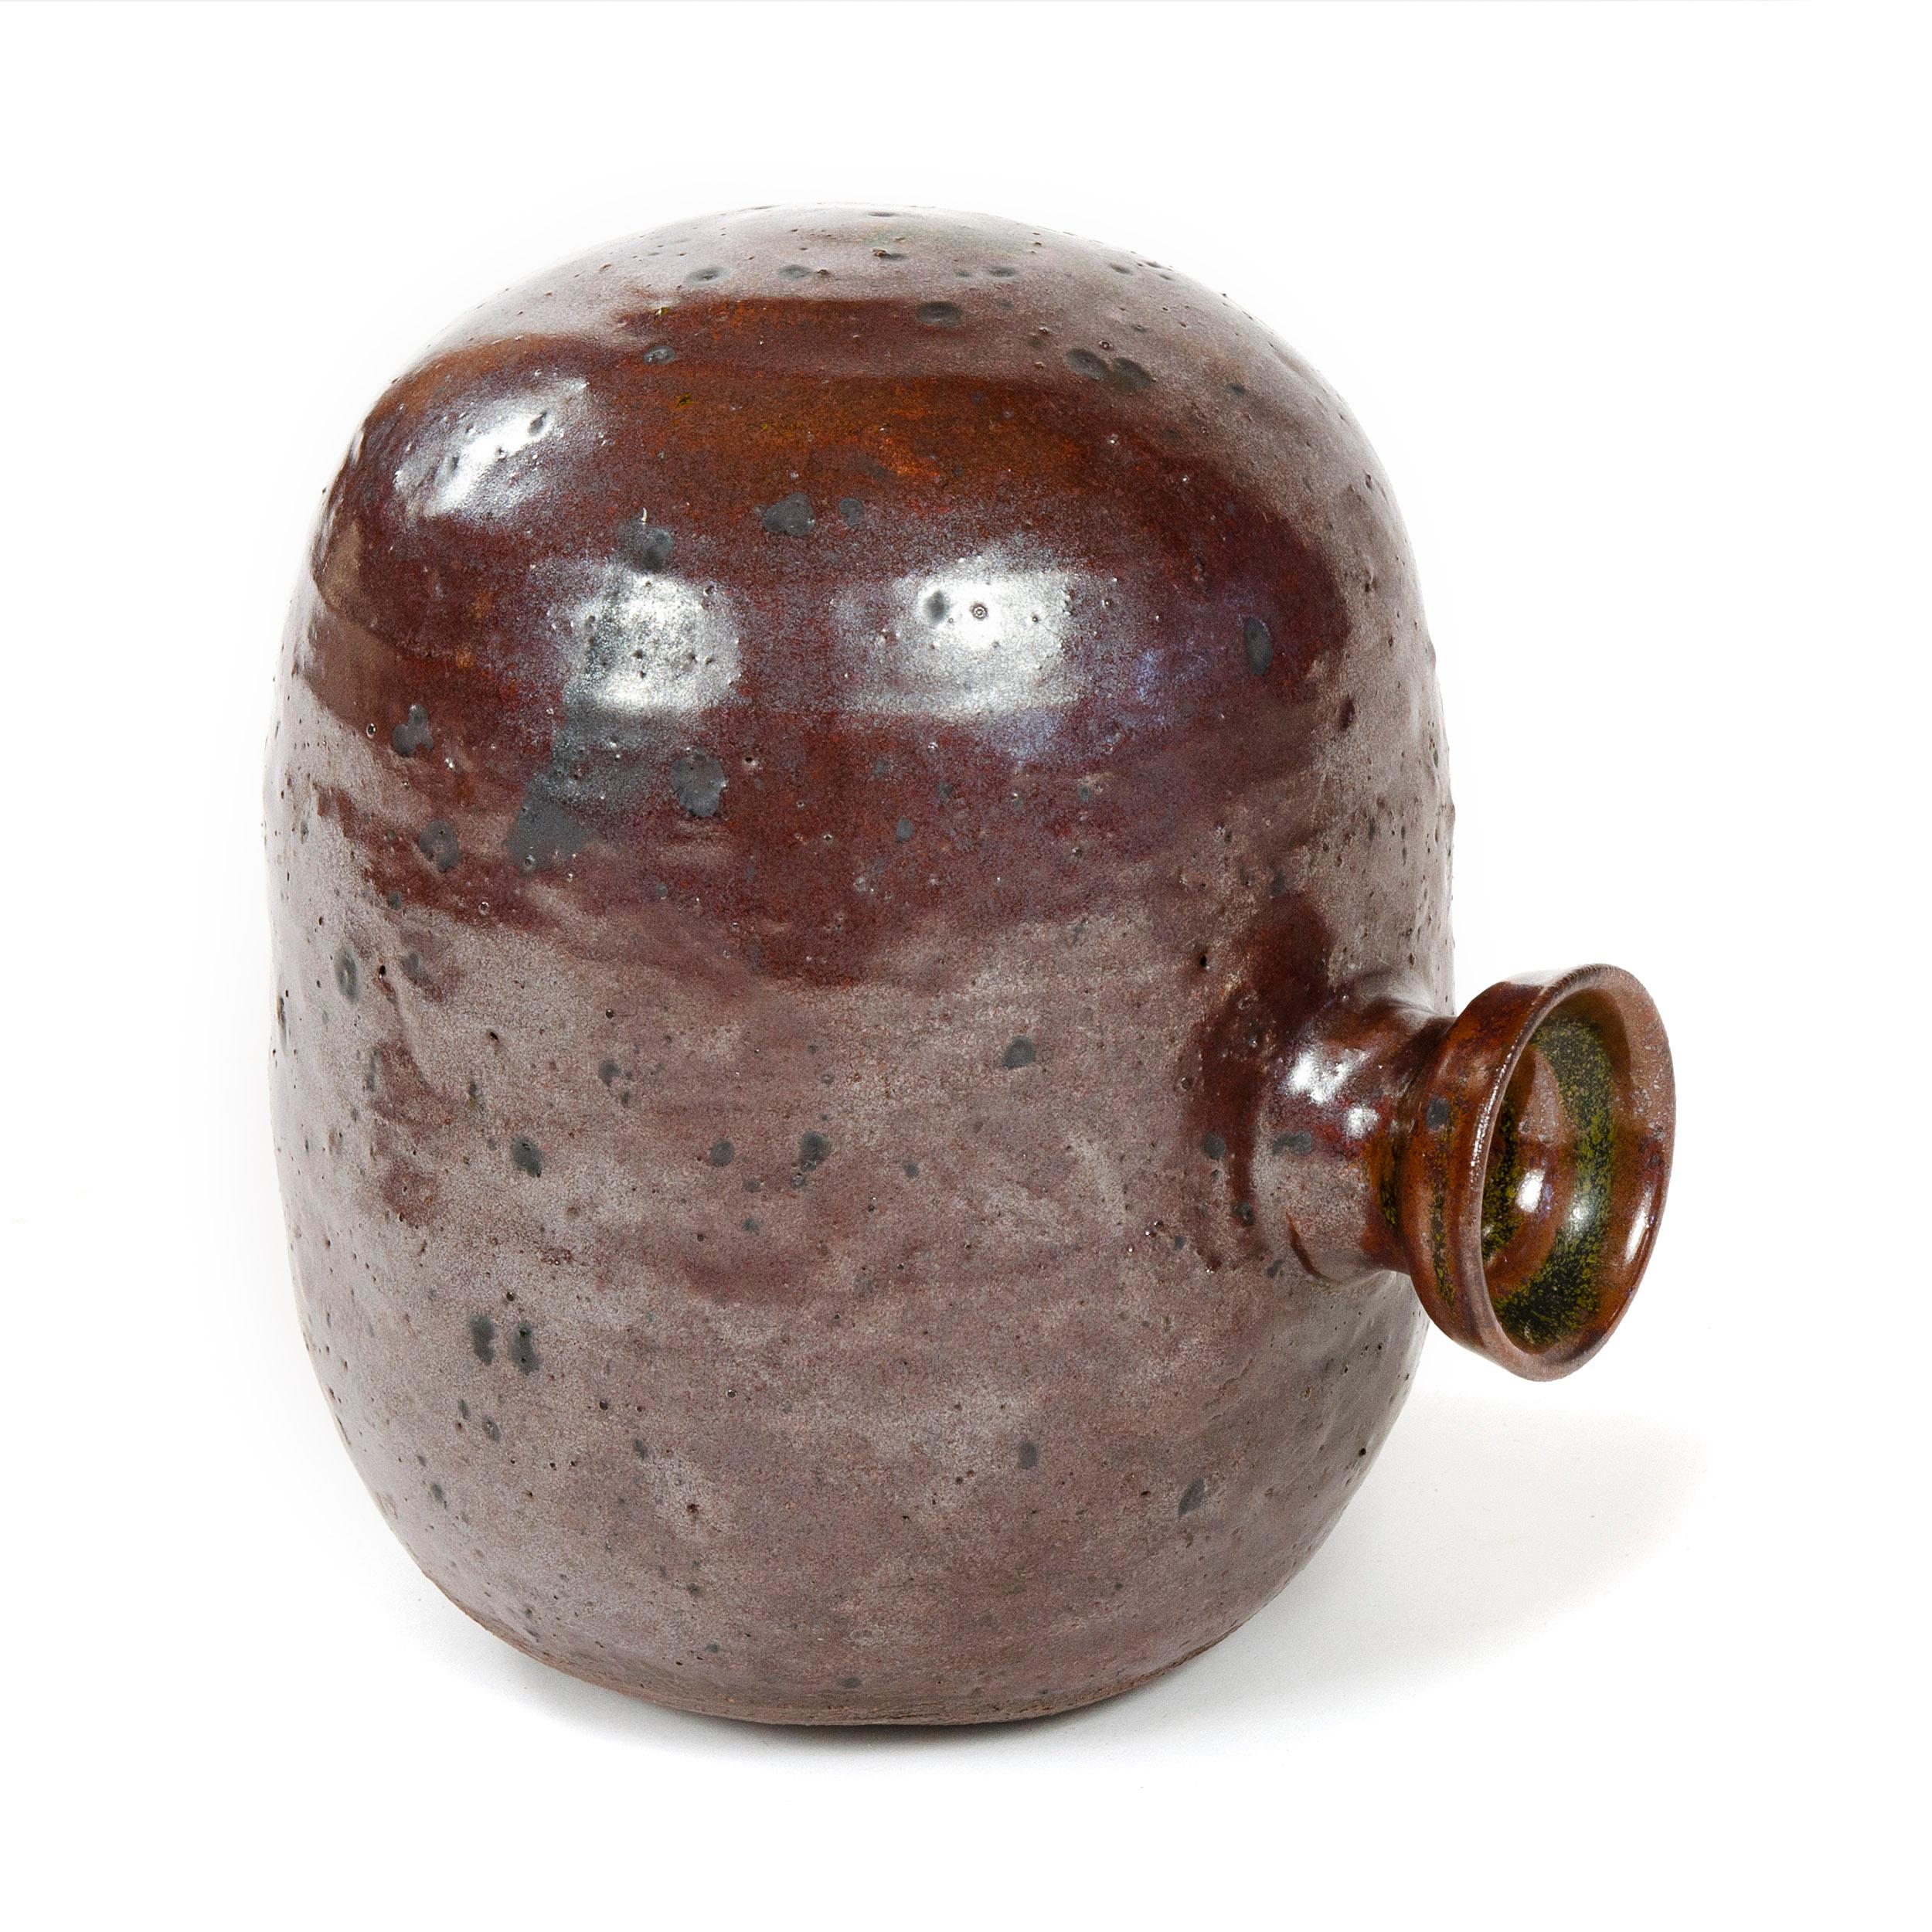 A brown glazed ceramic vessel with a center placed opening spout.